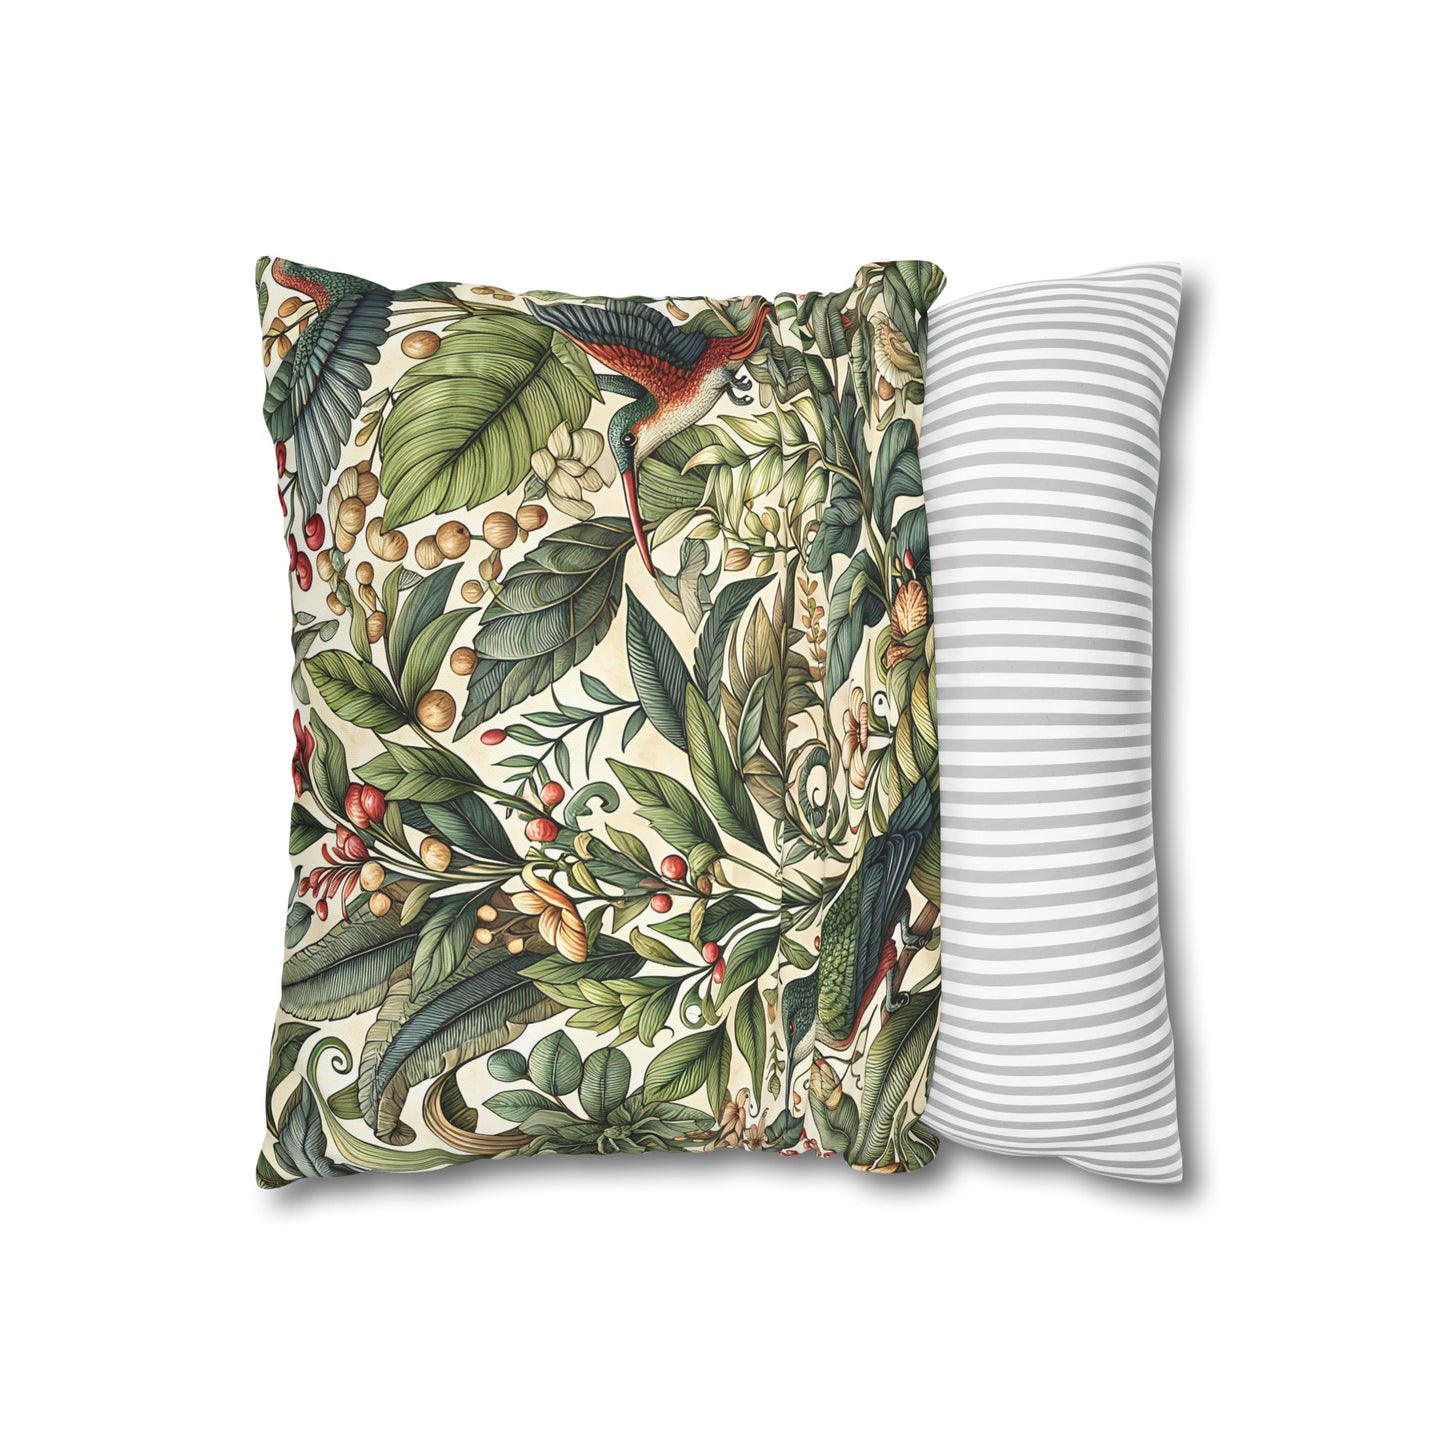 Lively Greenery Cushion Cover